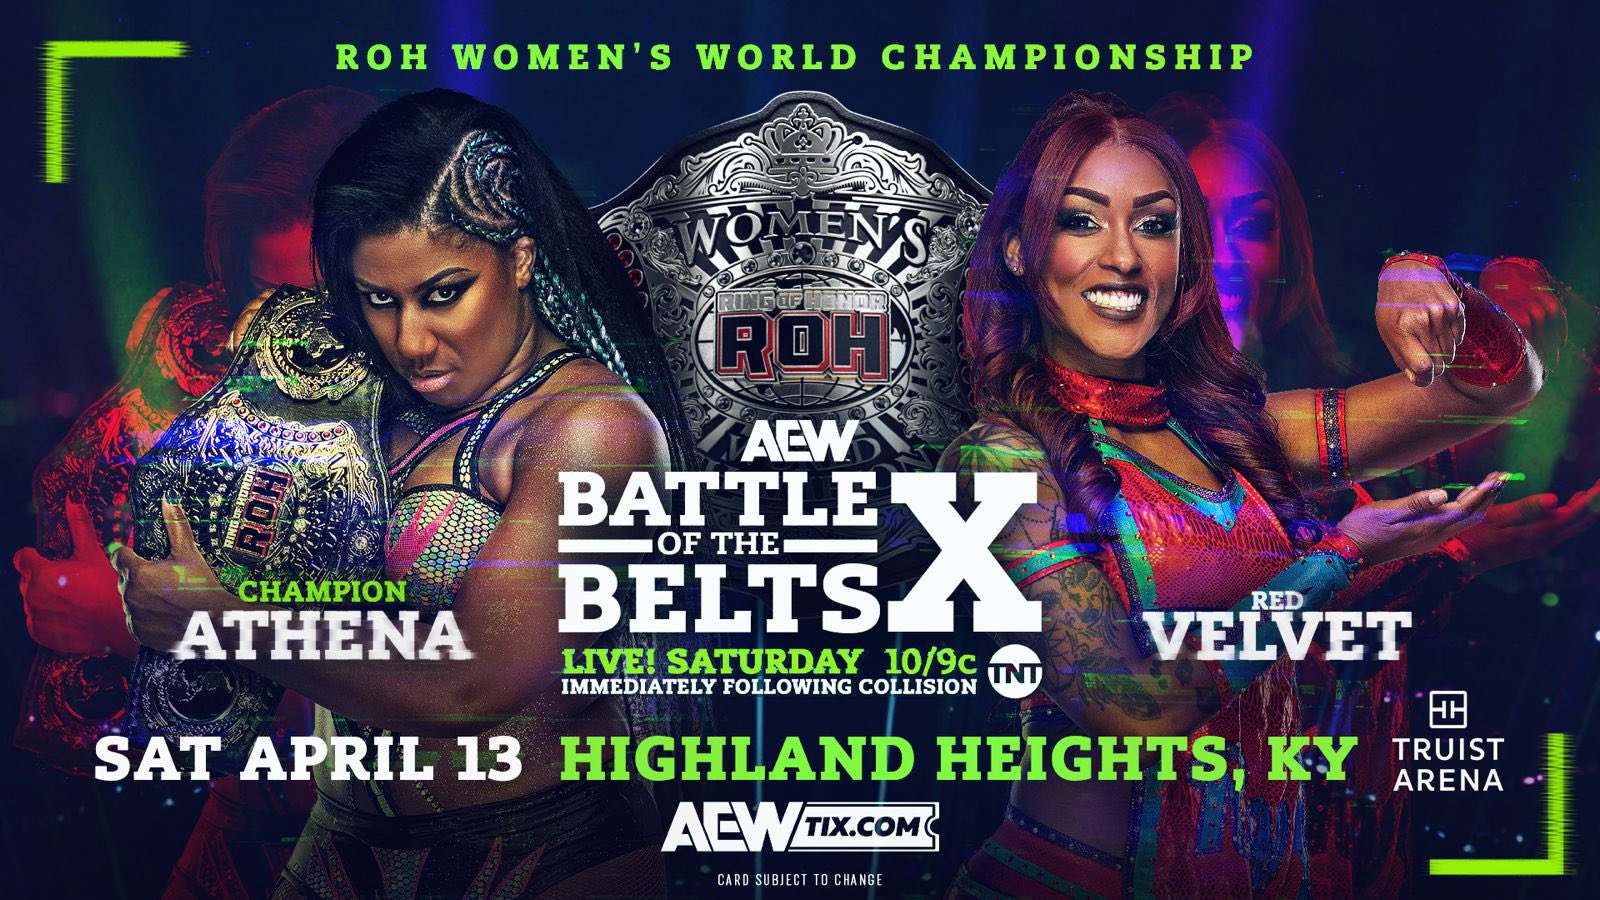 Athena vs. Red Velvet Added To AEW Battle of the Belts X